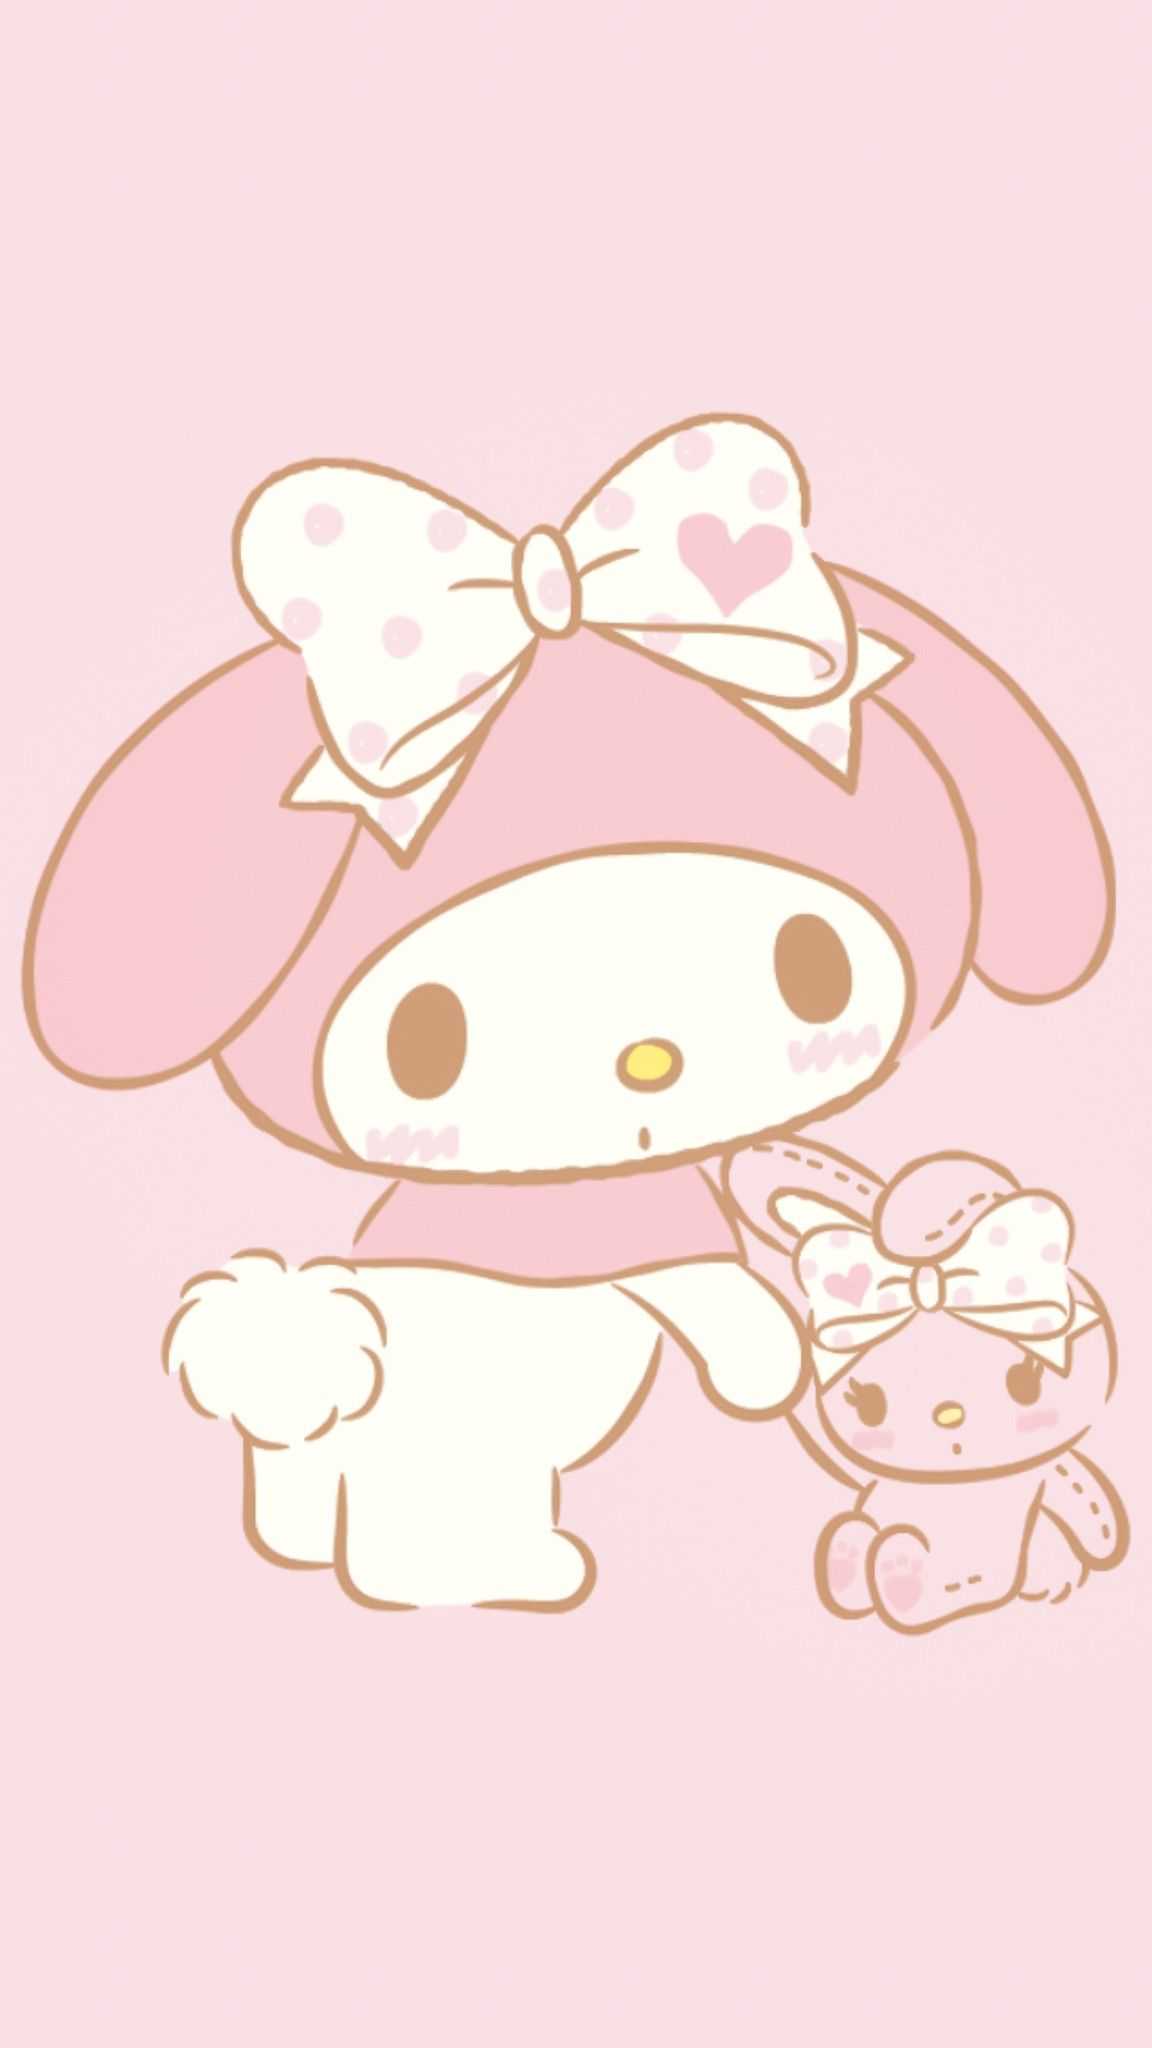 My Melody iPhone Wallpaper with high-resolution 1080x1920 pixel. You can use this wallpaper for your iPhone 5, 6, 7, 8, X, XS, XR backgrounds, Mobile Screensaver, or iPad Lock Screen - My Melody